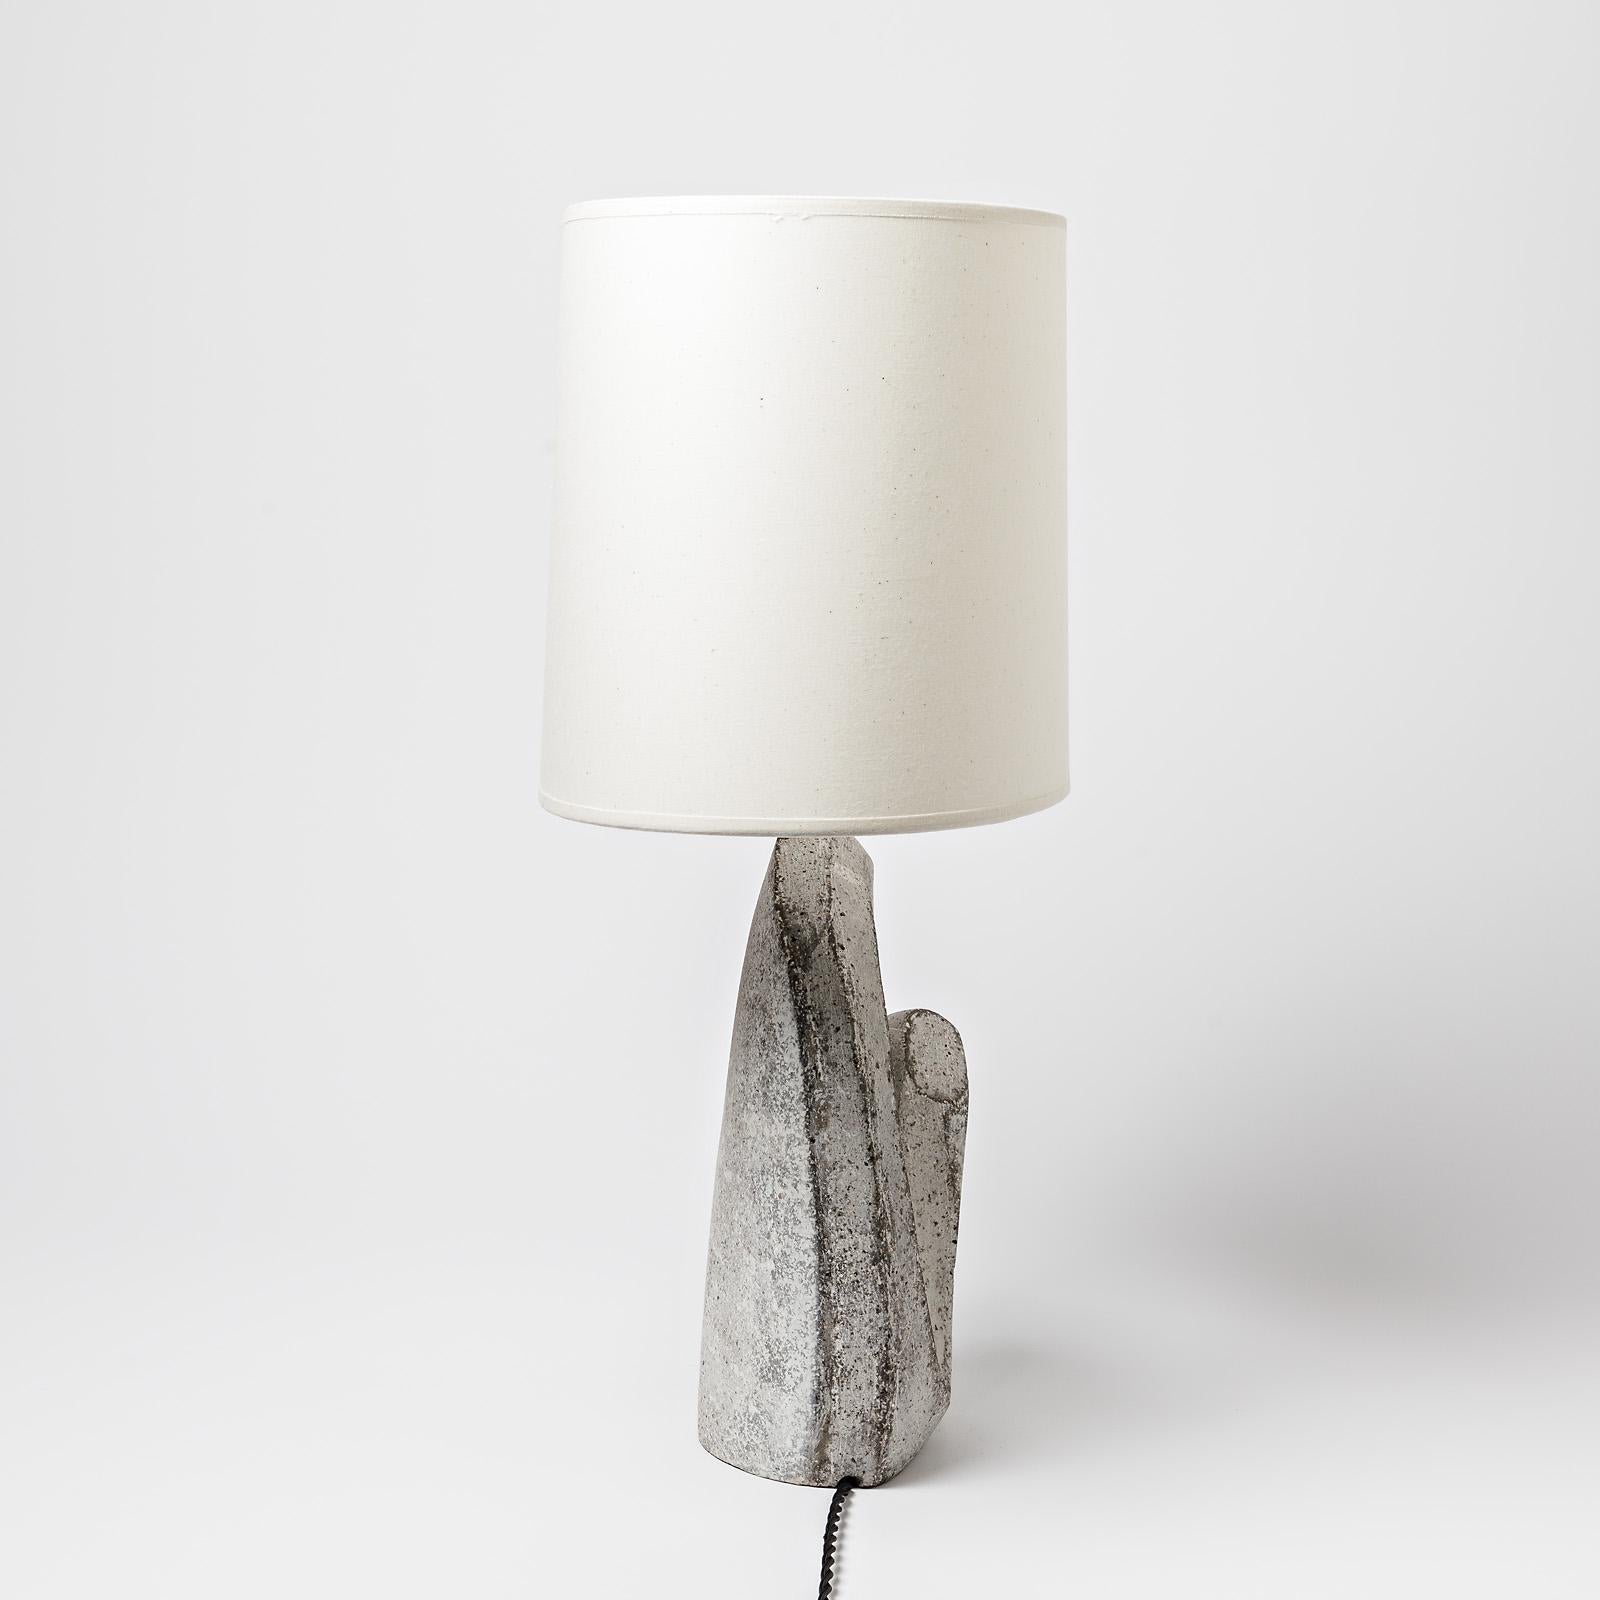 Pair of Ceramic Table Lamps by Maarten Stuer, circa 2021 For Sale 8